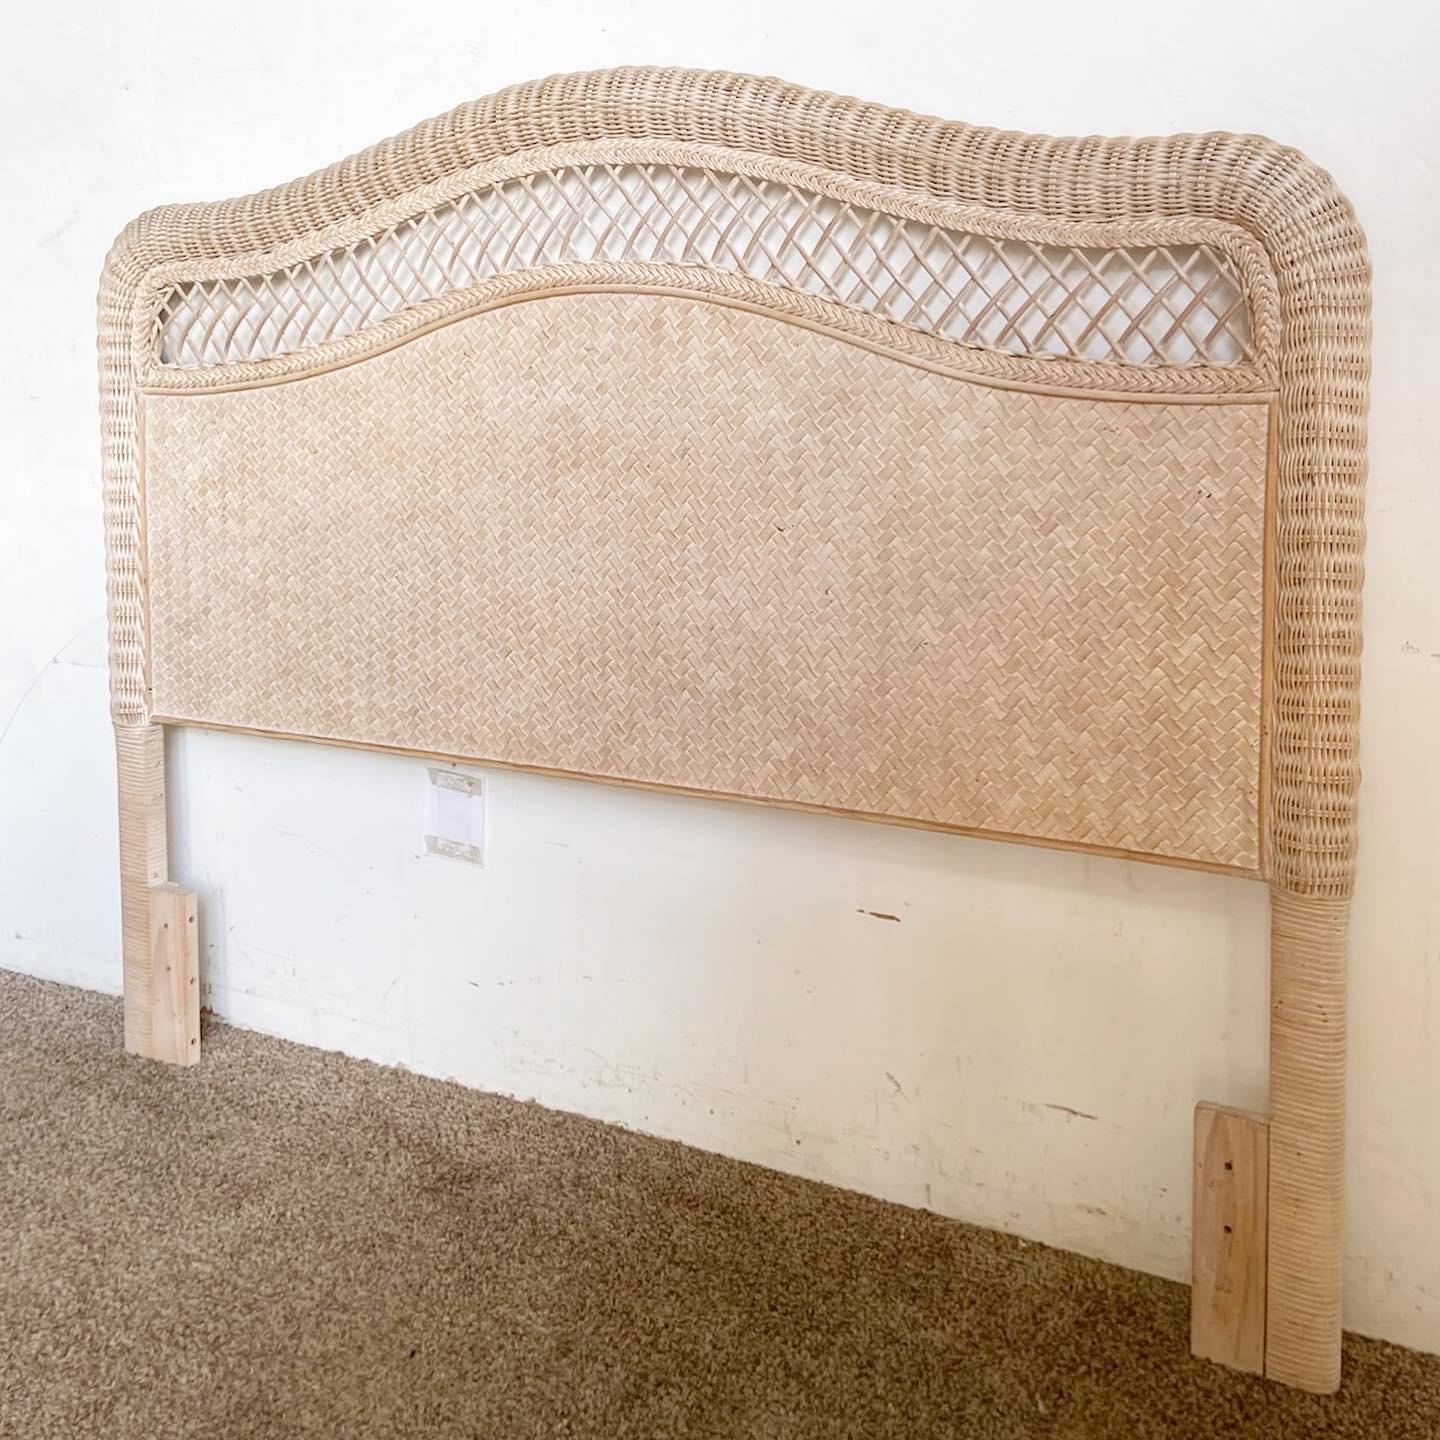 Embrace the essence of bohemian style with the Bohemian Rattan Wicker Queen Headboard. Intricately woven with rattan and wicker, this headboard offers a natural, organic touch. Its detailed patterns and warm textures add sophistication, making it a